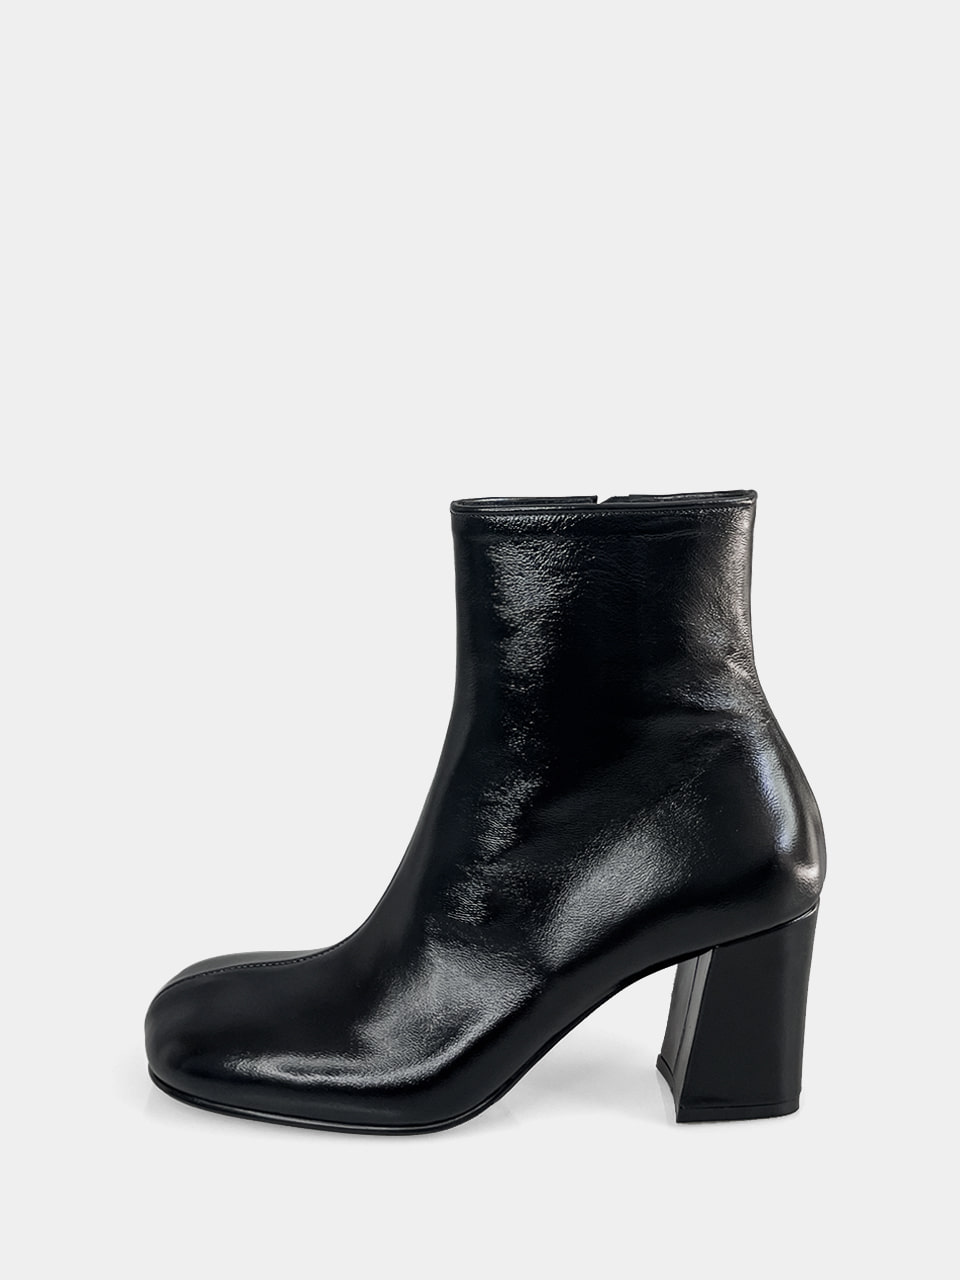 Mrc103 Round Ankle Boots (Black Shadow)